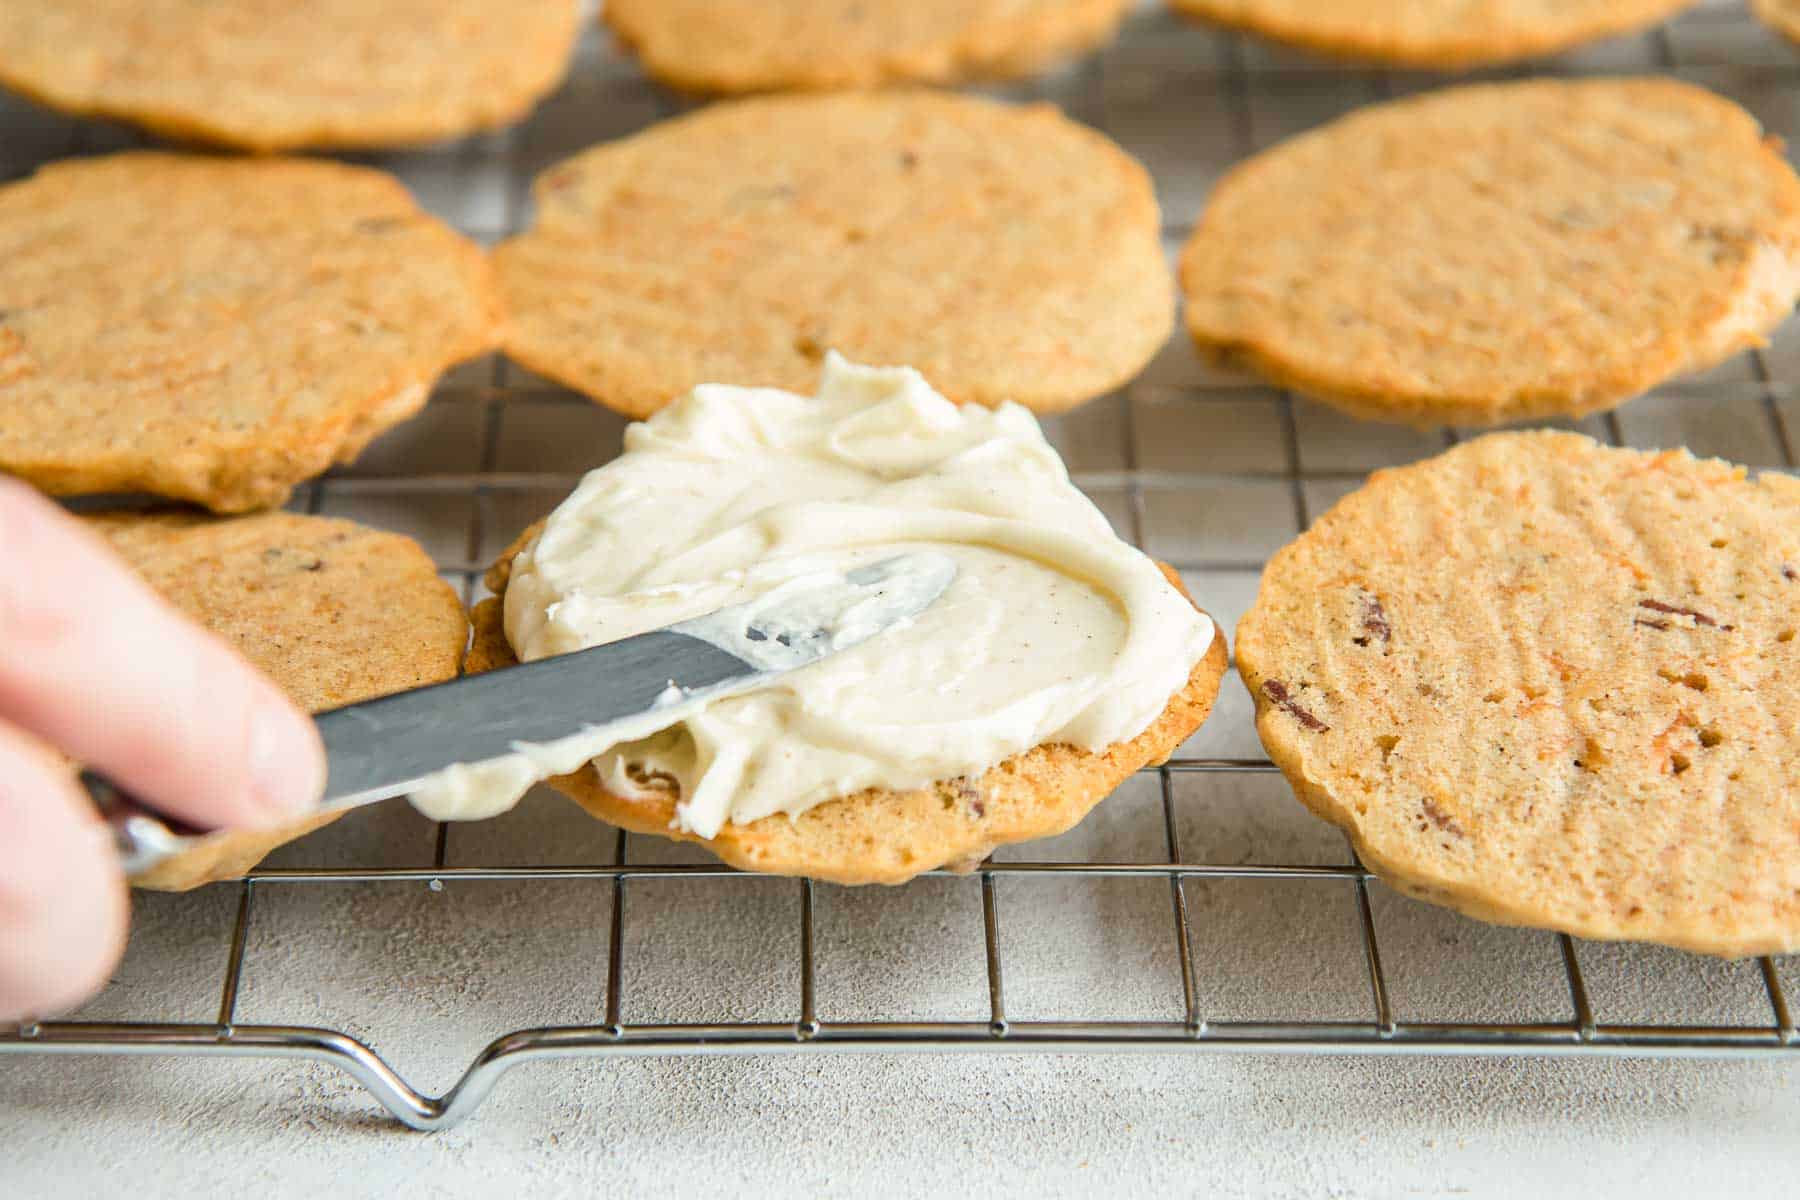 Filling cookies with frosting using a knife